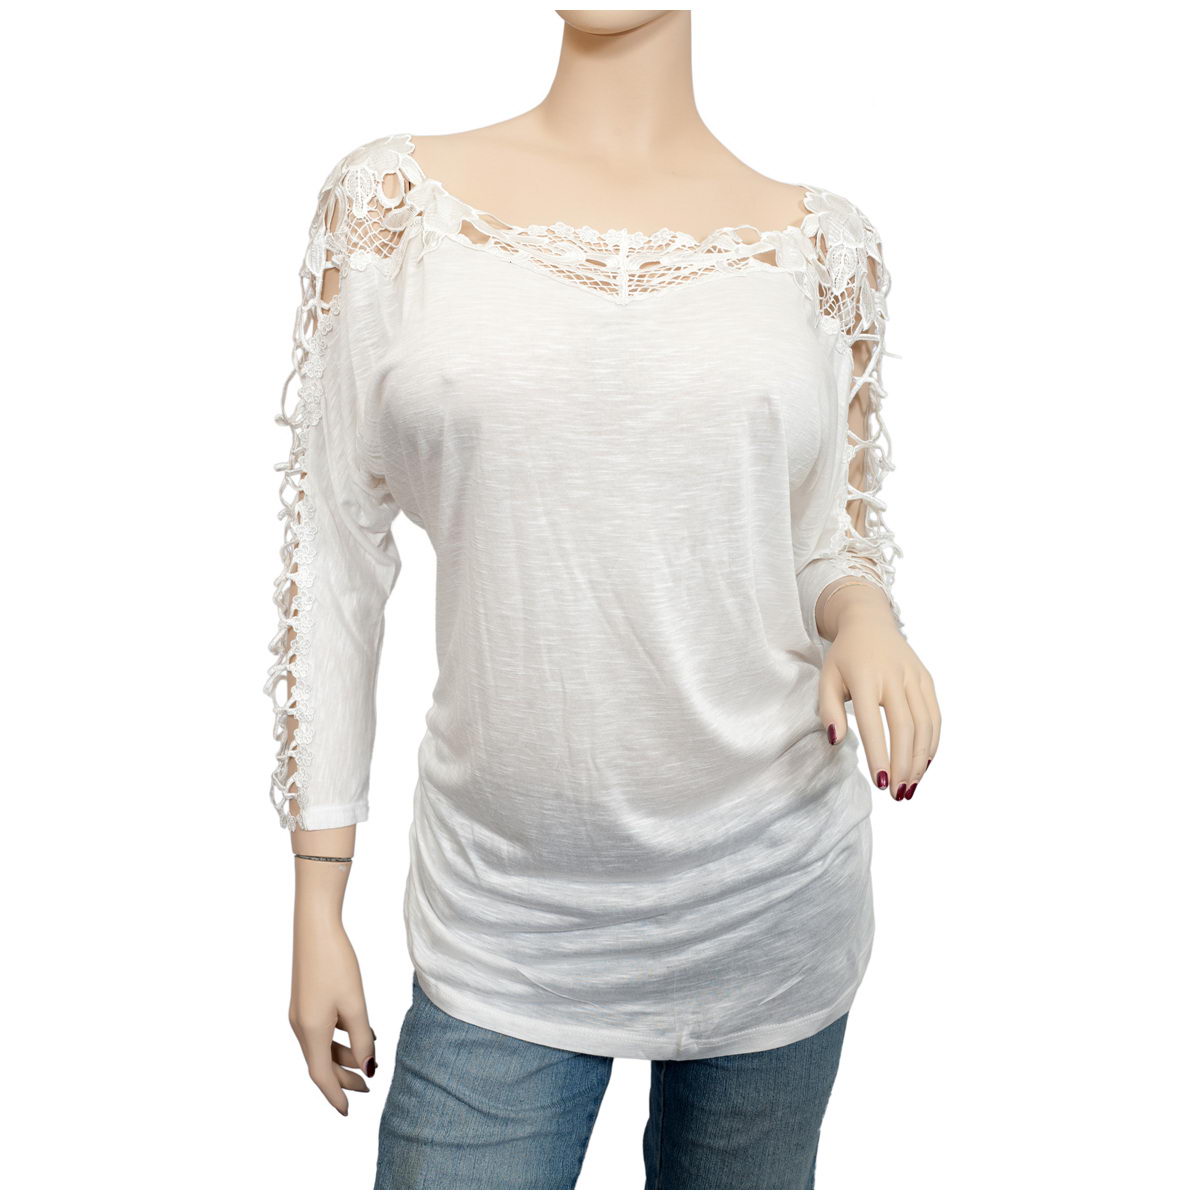 Plus Size Sexy Lace Accented Long Sleeve Top White | eVogues Apparel